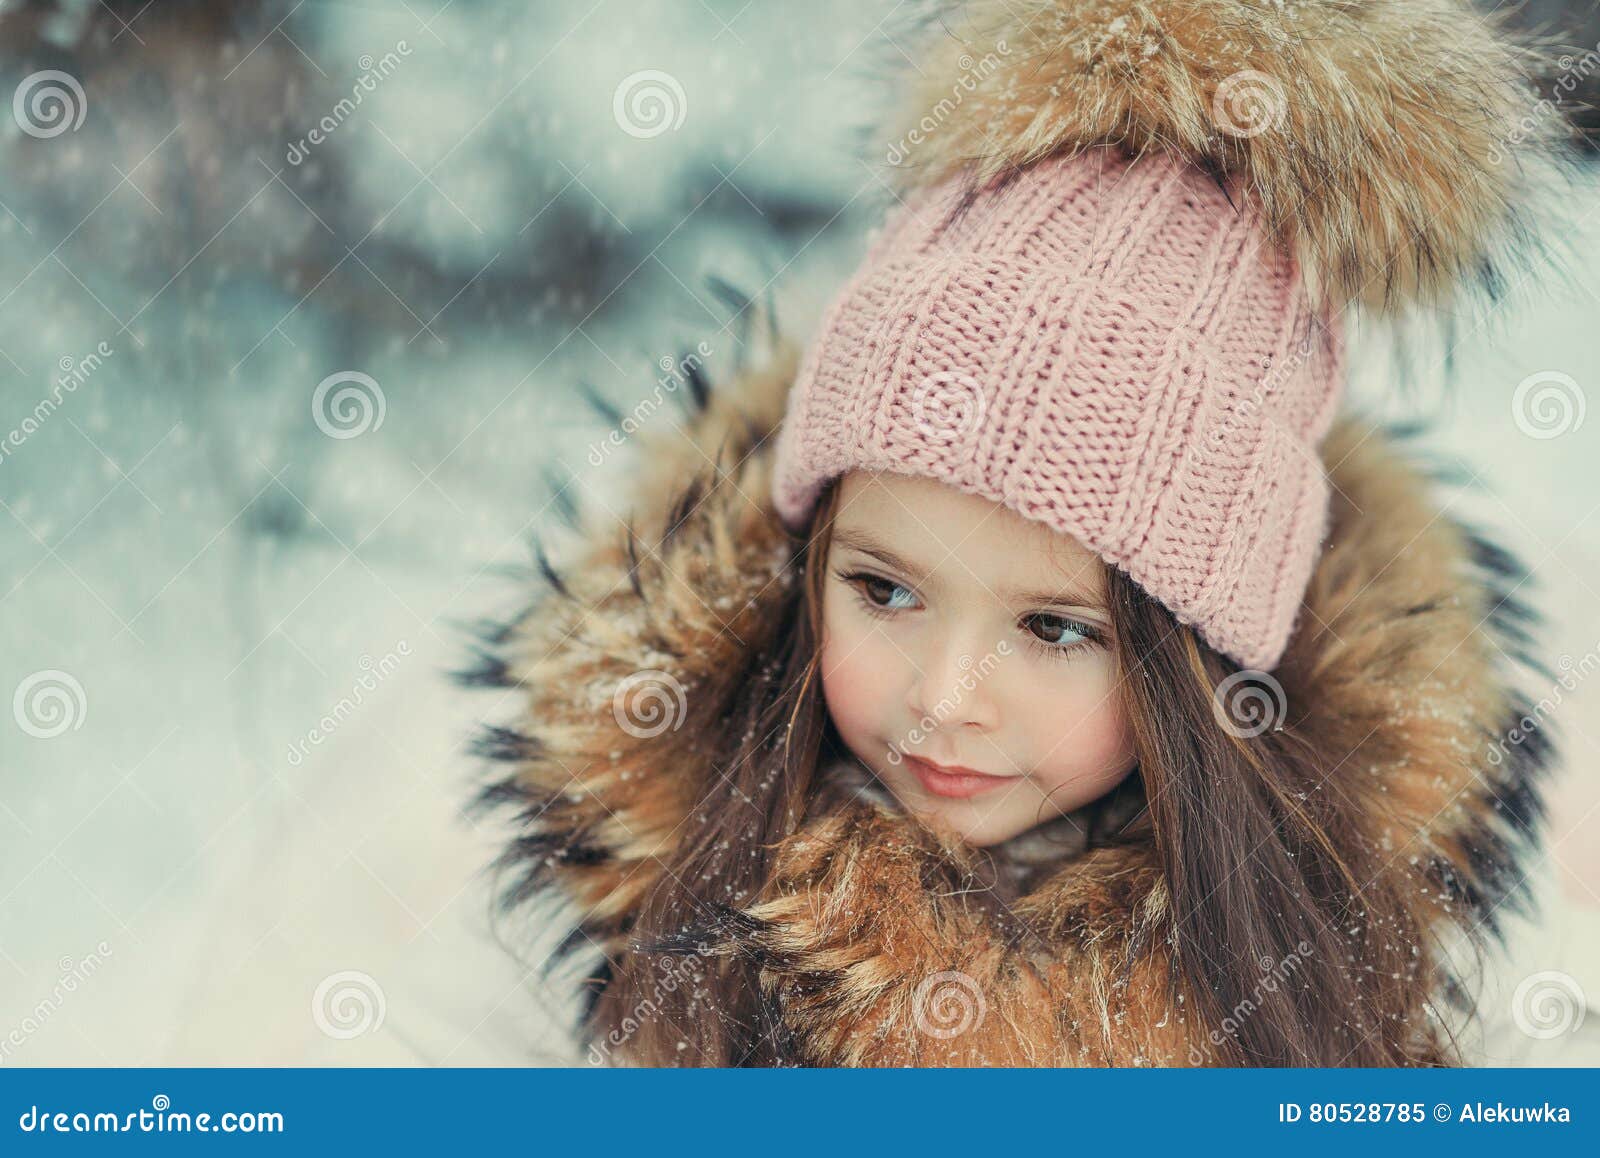 Snowy Winter and a Girl in a Cap Stock Image - Image of forest ...